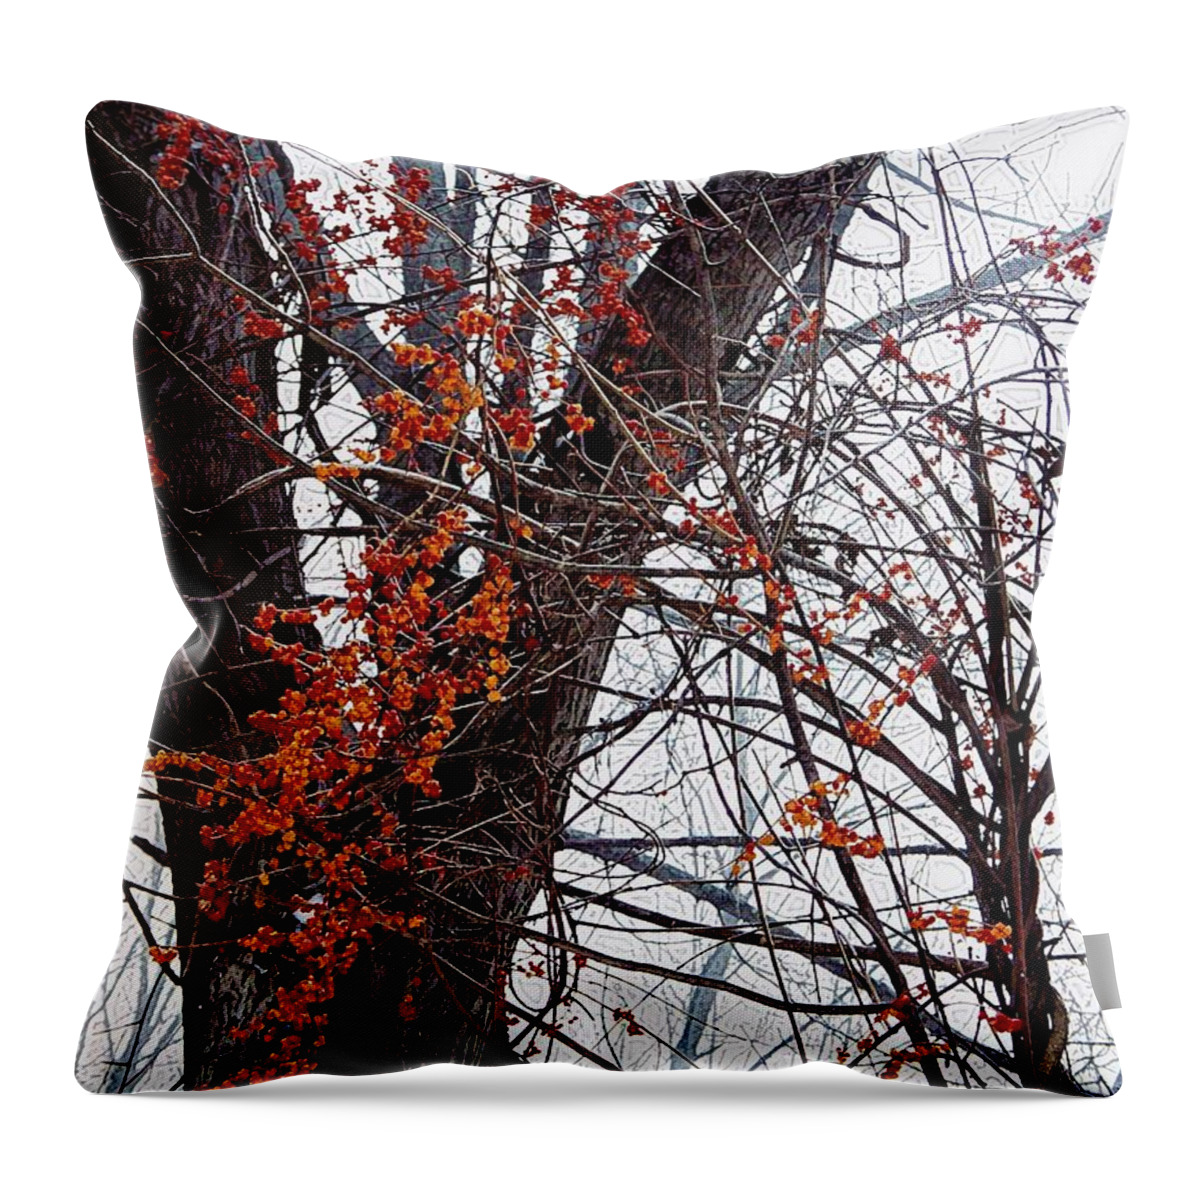 Bittersweet Throw Pillow featuring the photograph Bittersweet by Joy Nichols